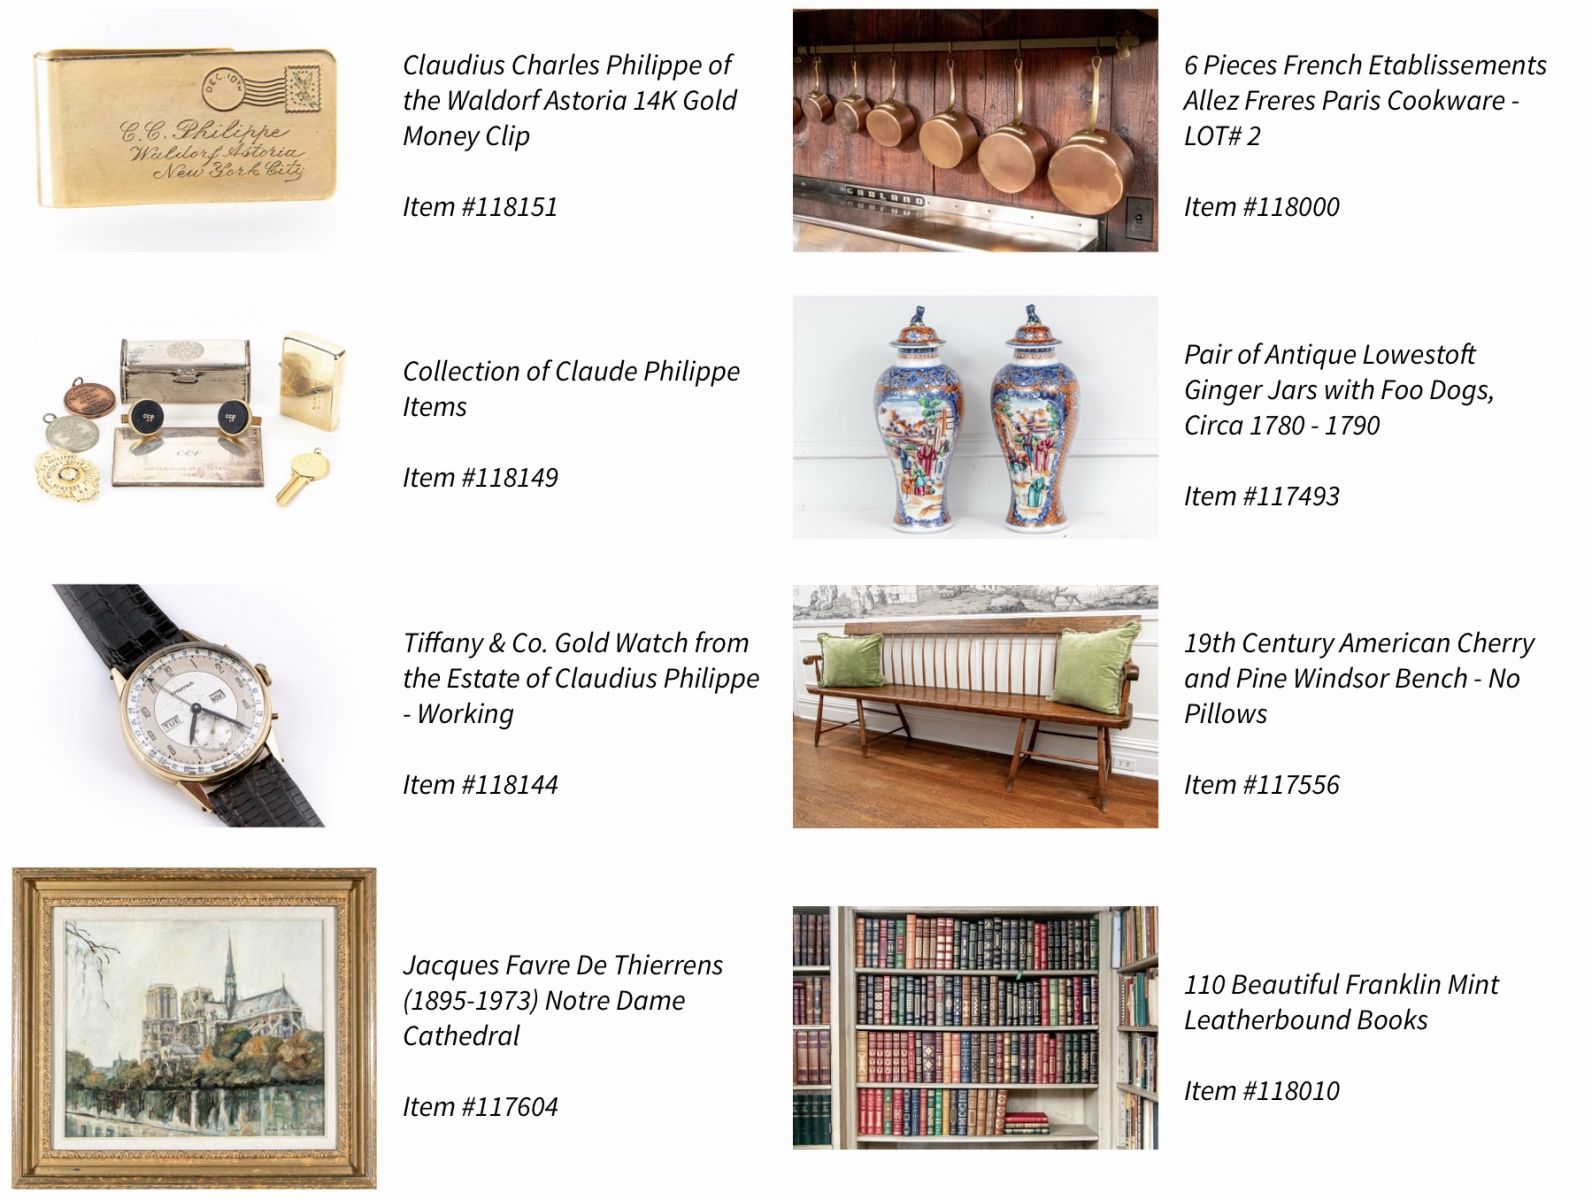 Some highlights and interesting estate auction lot images from Claude Philippe